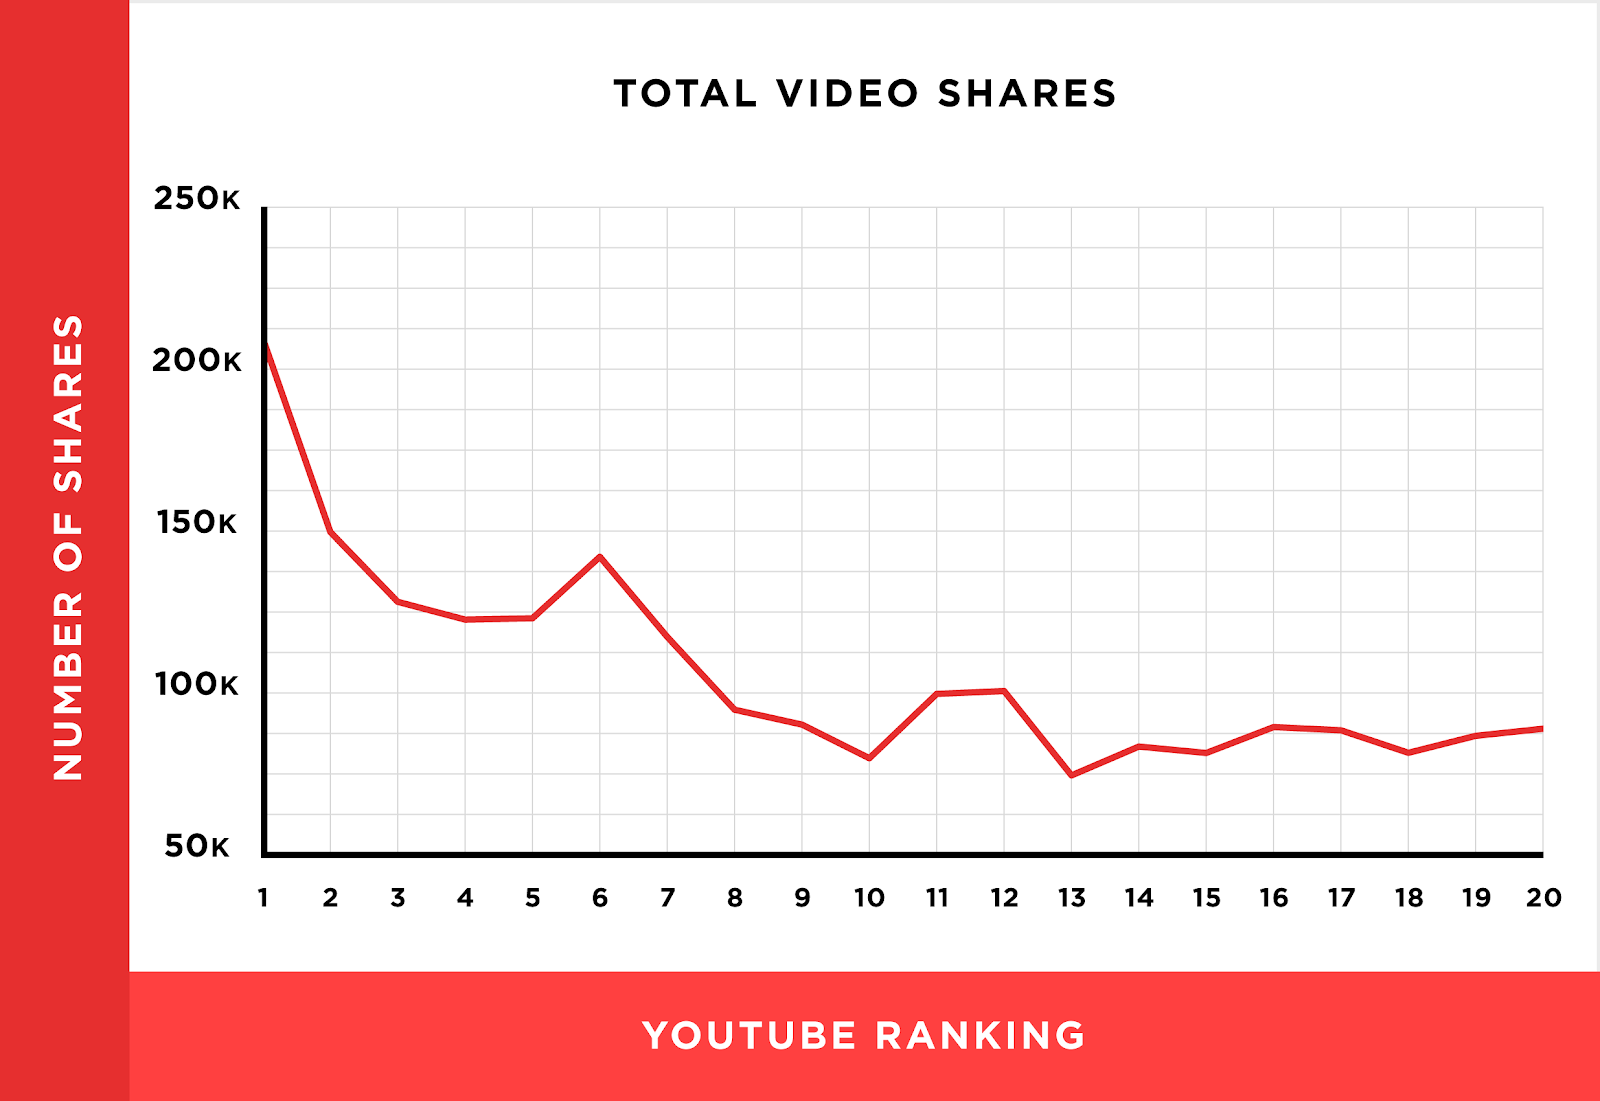 Backlinko's chart showing a link between social shares and YouTube SEO